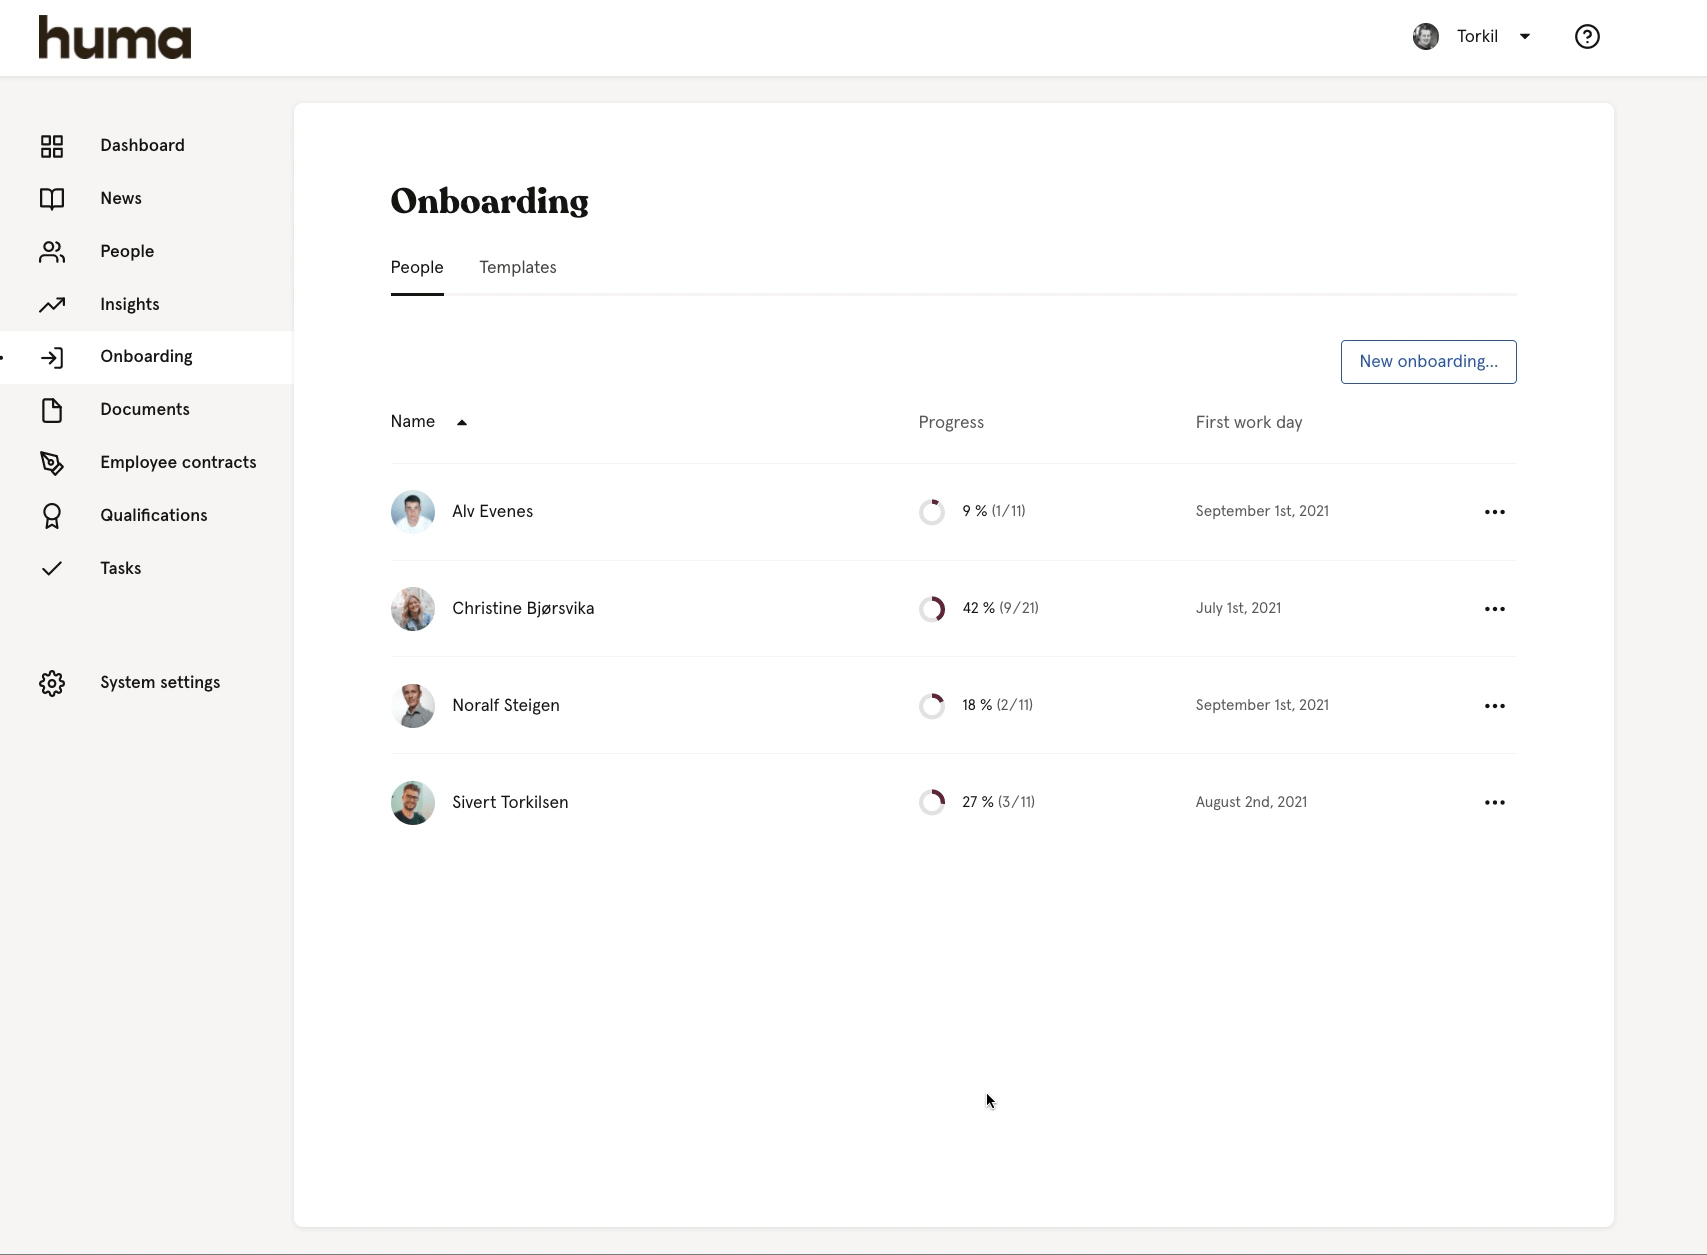 onboarding overview